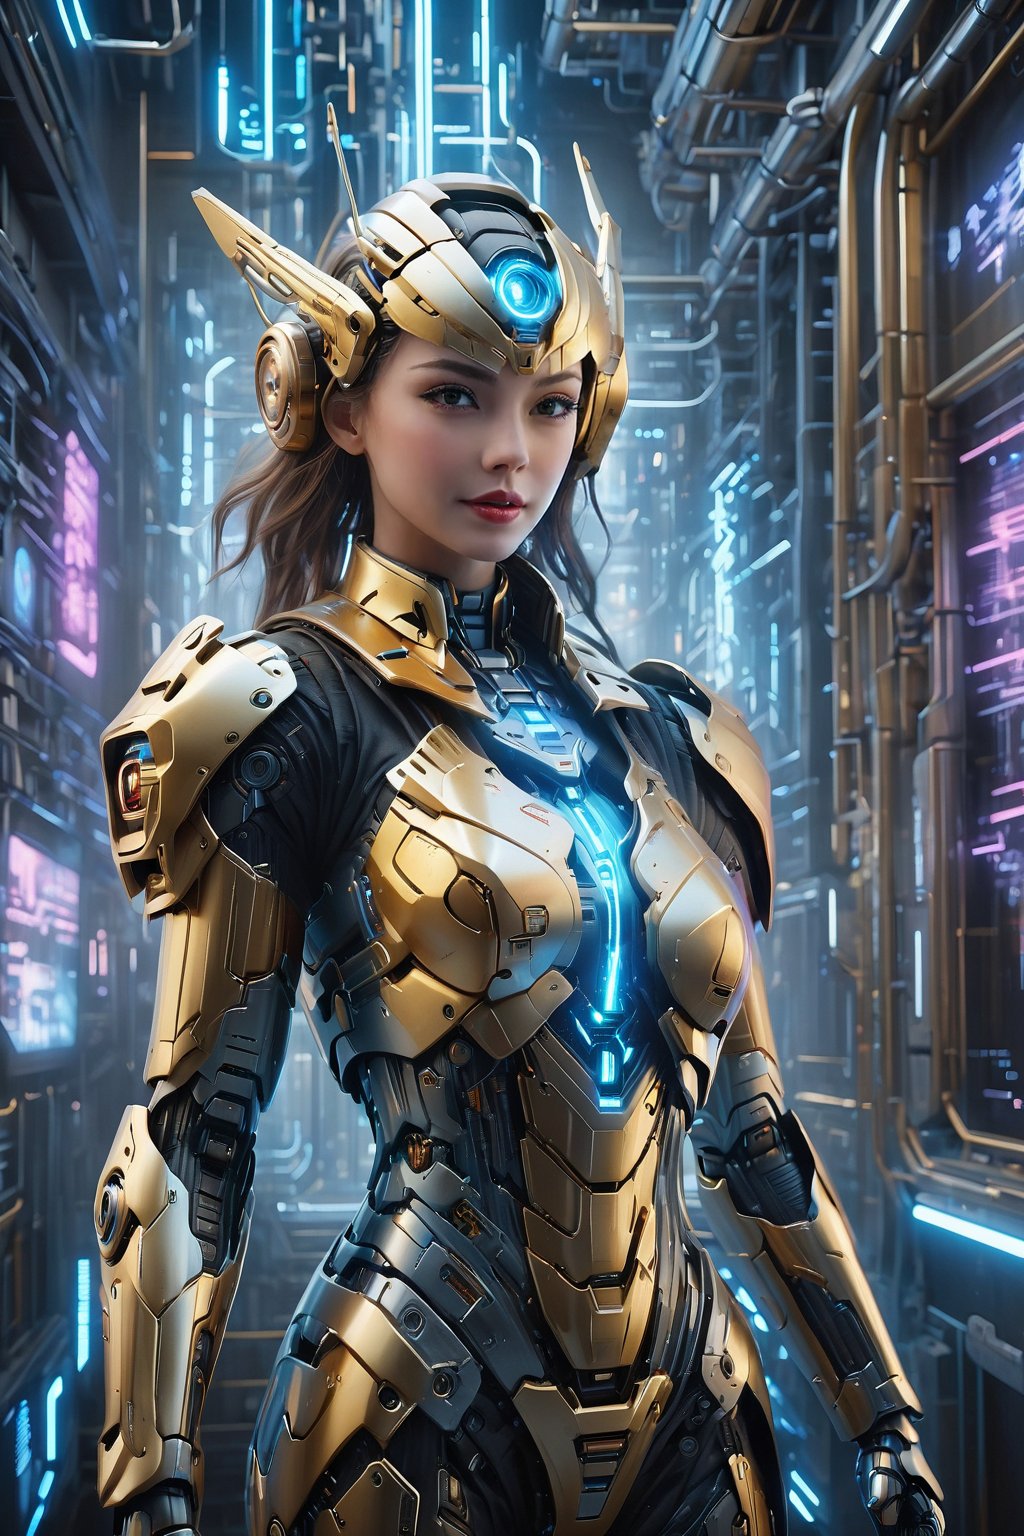 Masterpiece, High quality, 64K, Unity 64K Wallpaper, HDR, Best Quality, RAW, Super Fine Photography, Super High Resolution, Super Detailed, Beautiful and Aesthetic, Stunningly beautiful, Perfect proportions, 
1girl, Solo, White skin, Detailed skin, Realistic skin details, (Mecha:1.5)
Futuristic Mecha, Arms Mecha, Dynamic pose, Battle stance, Swaying hair, by FuturEvoLab, 
Dark City Night, Cyberpunk City, Cyberpunk architecture, Future architecture, Fine architecture, Accurate architectural structure, Detailed complex busy background, Gorgeous, Cherry blossoms,
Sharp focus, Perfect facial features, Pure and pretty, Perfect eyes, Lively eyes, Elegant face, Delicate face, Exquisite face, Colorful Binary Code Energy, Blue Backlight, Golden Warrior Mecha, 